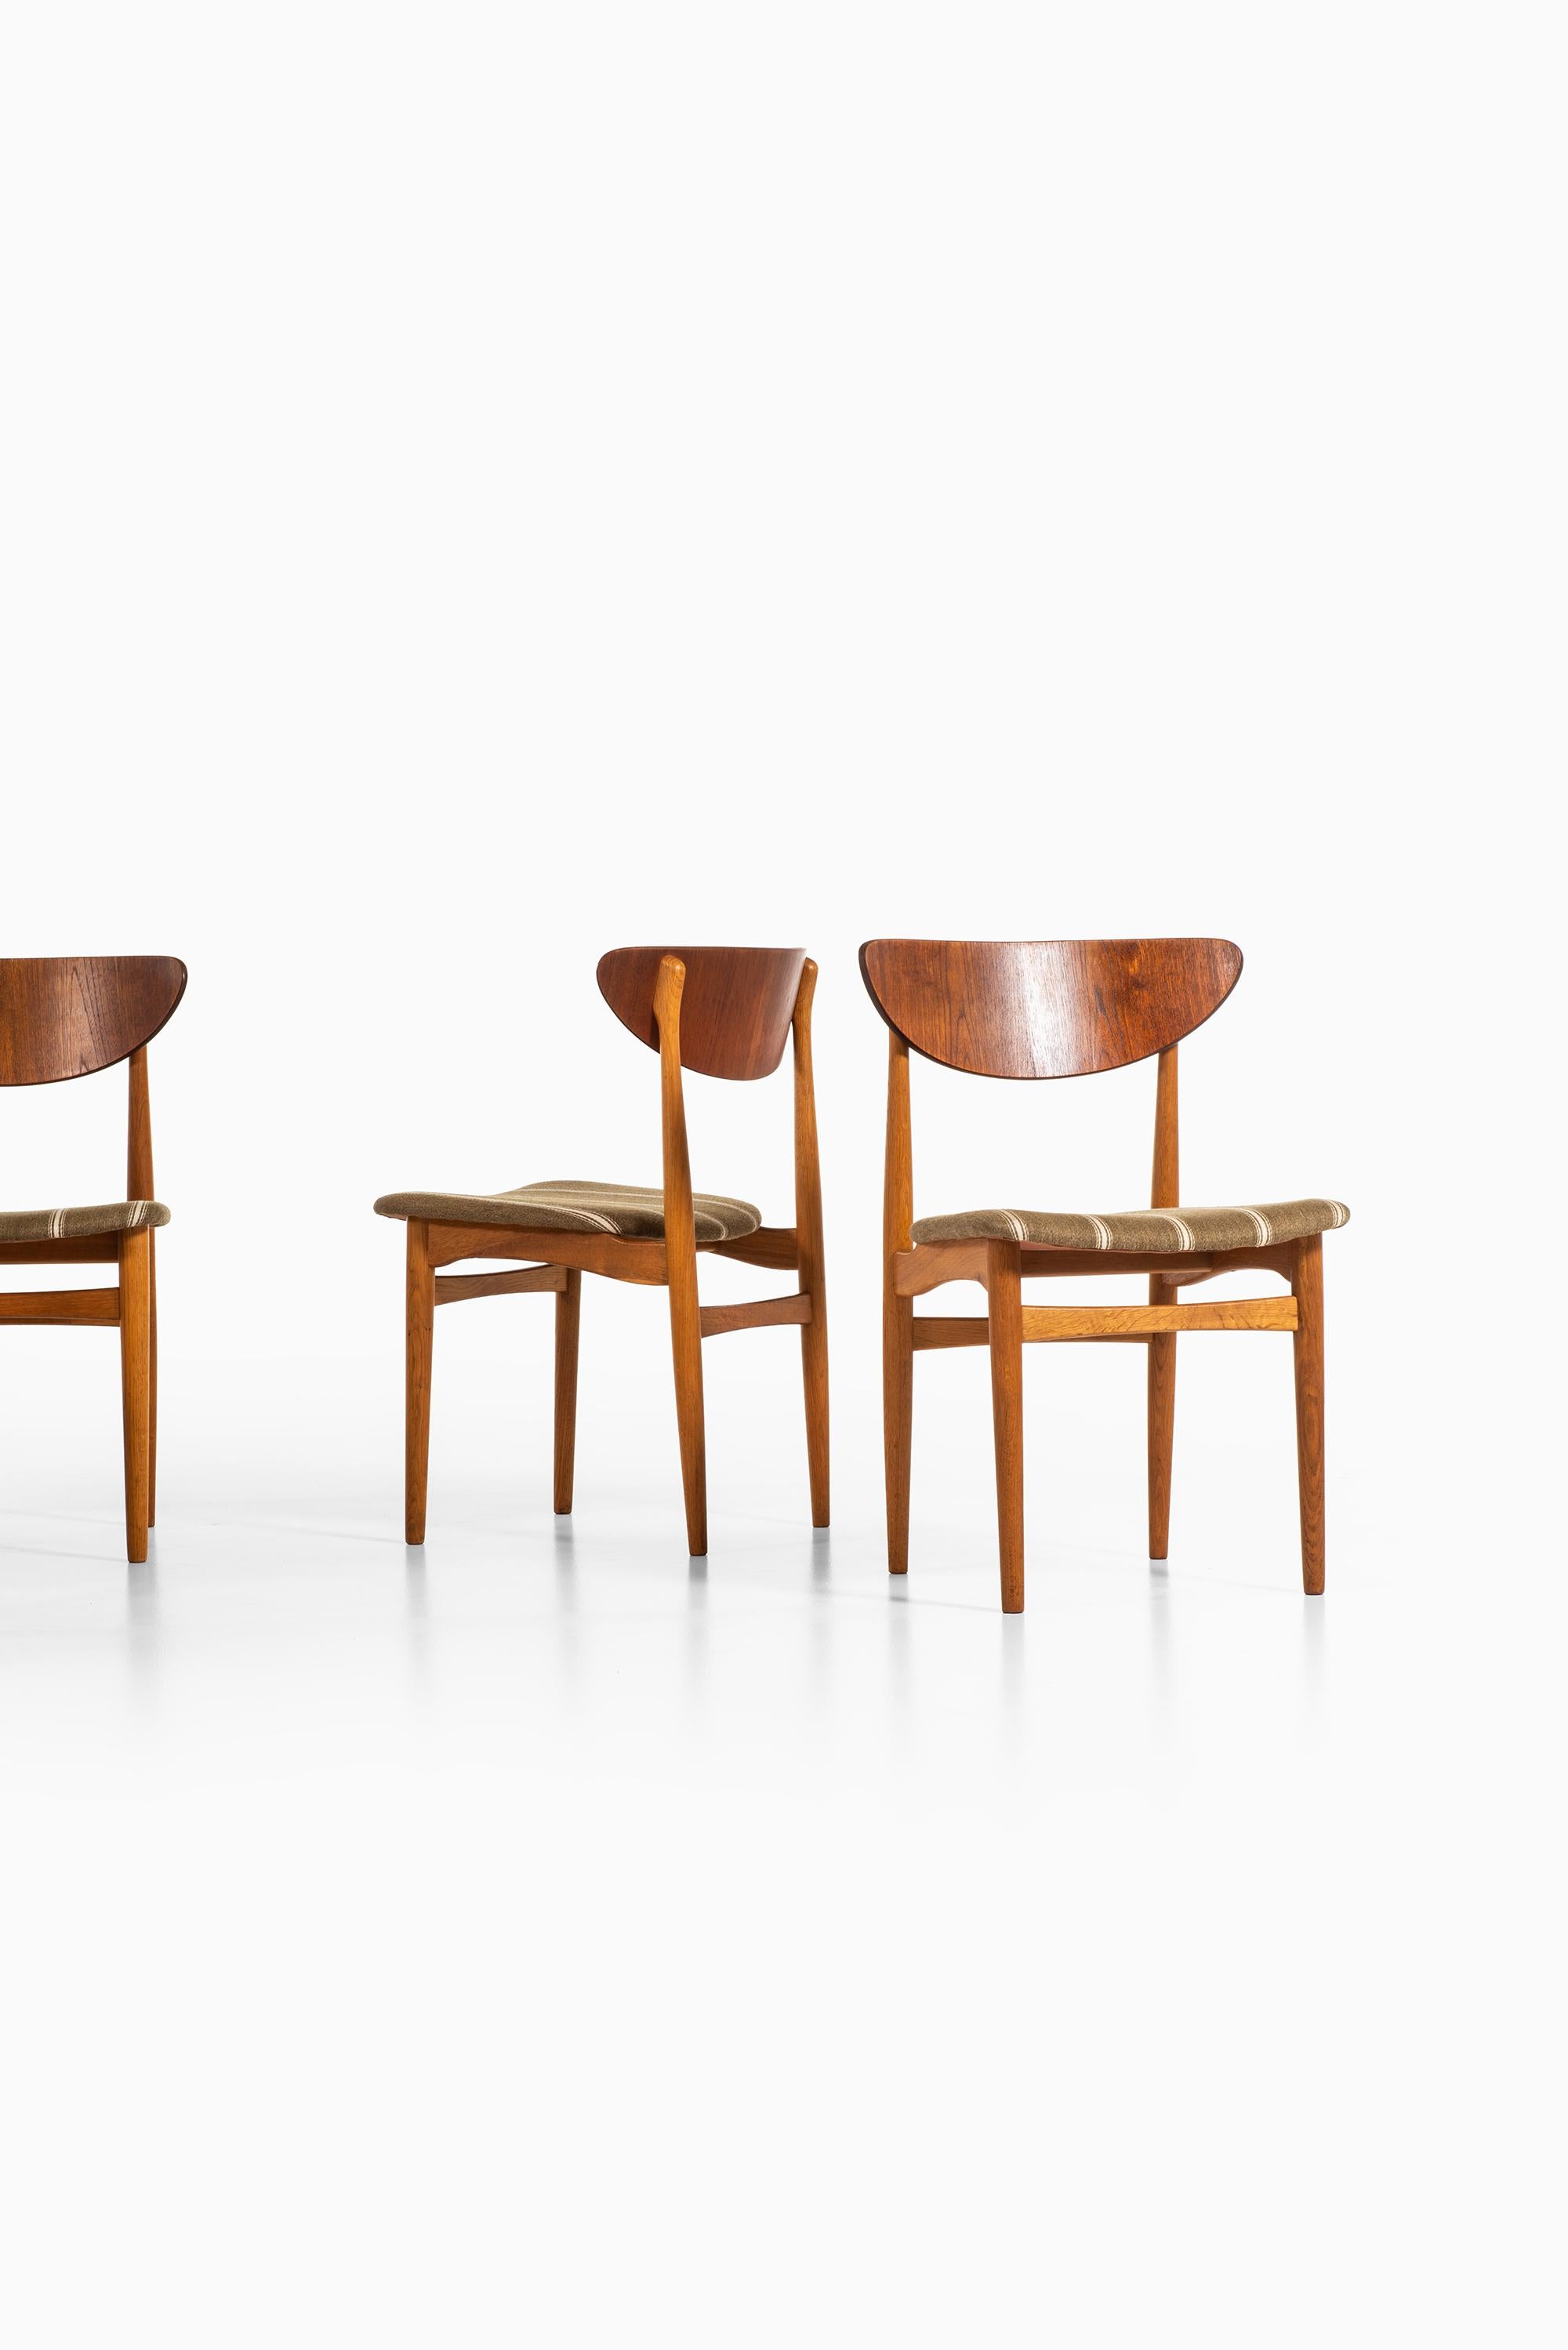 Rare set of 12 dining chairs designed by Henning Kjærnulf. Produced by Sorø Stolefabrik in Denmark.